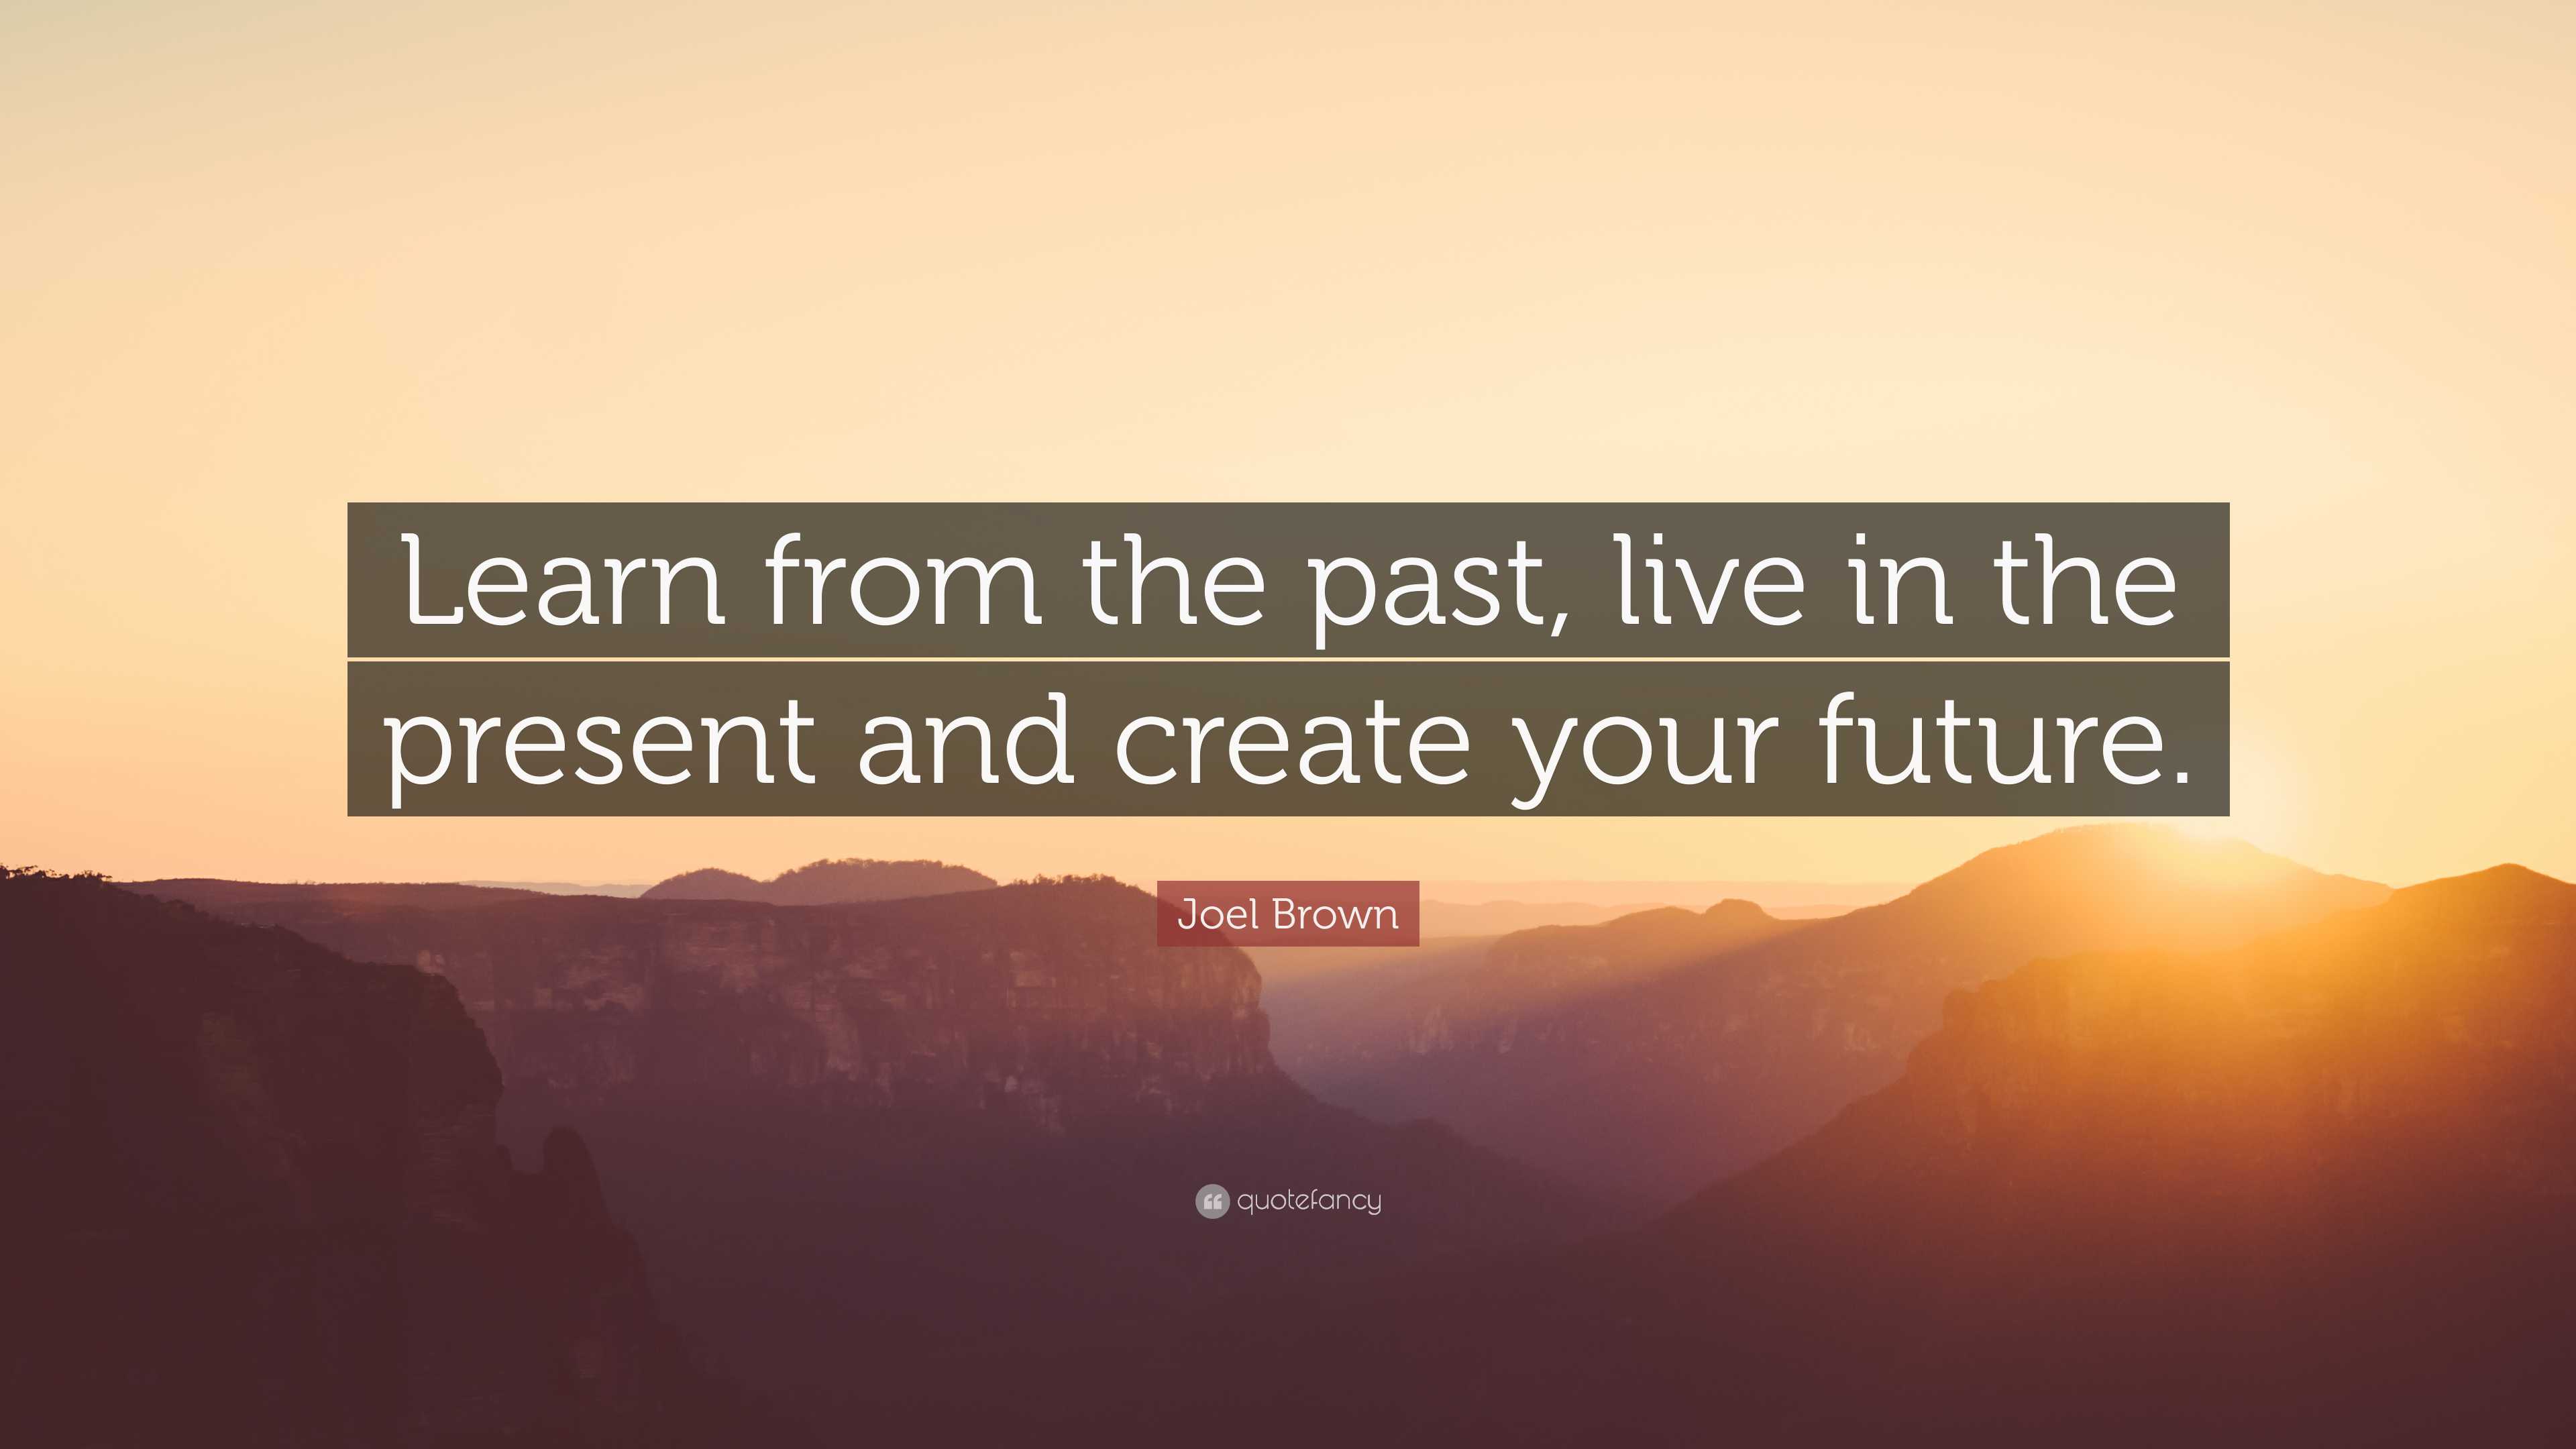 Take the past and the present and make a future fo